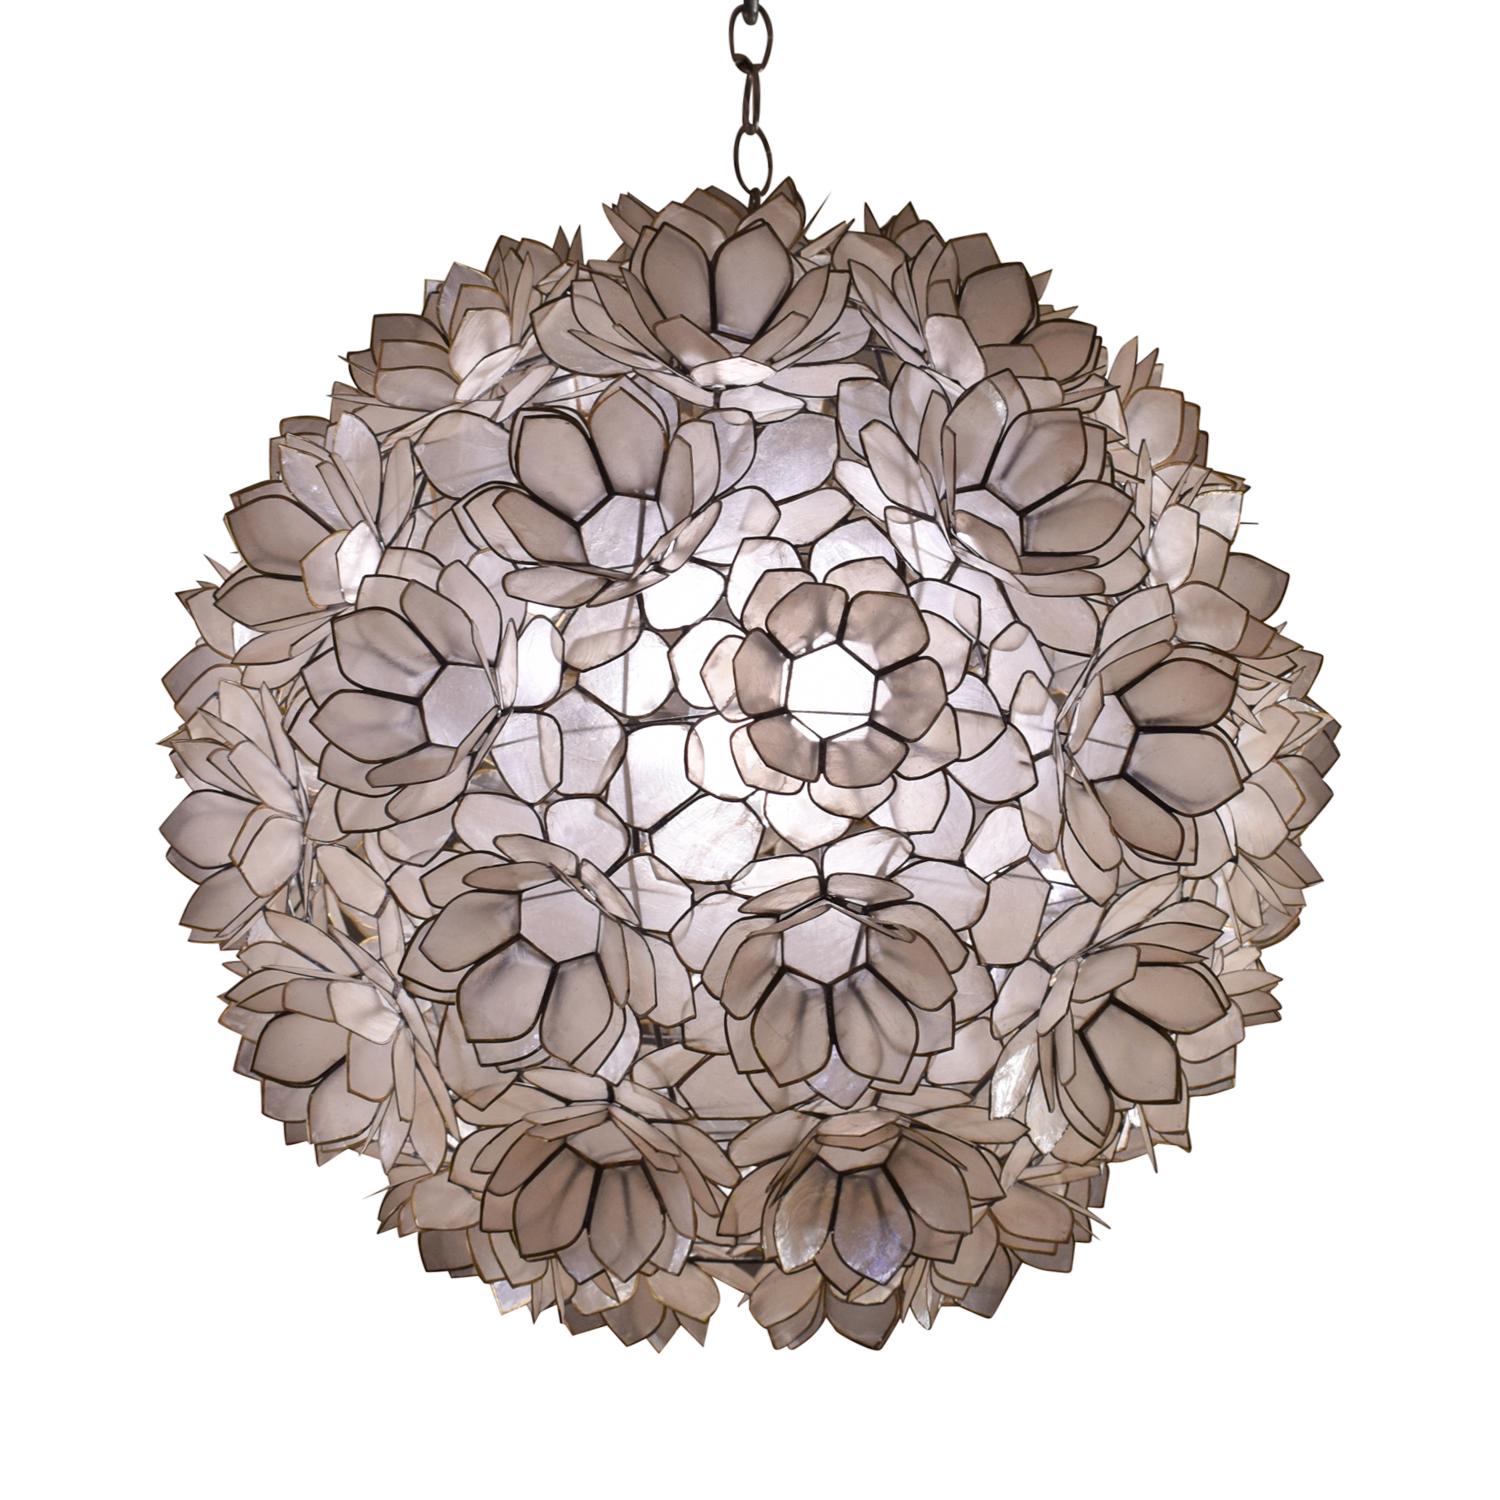 Artisan flower chandelier with round shade made of translucent sea shells, Philippines, 1970's. The overall drop can be customized.